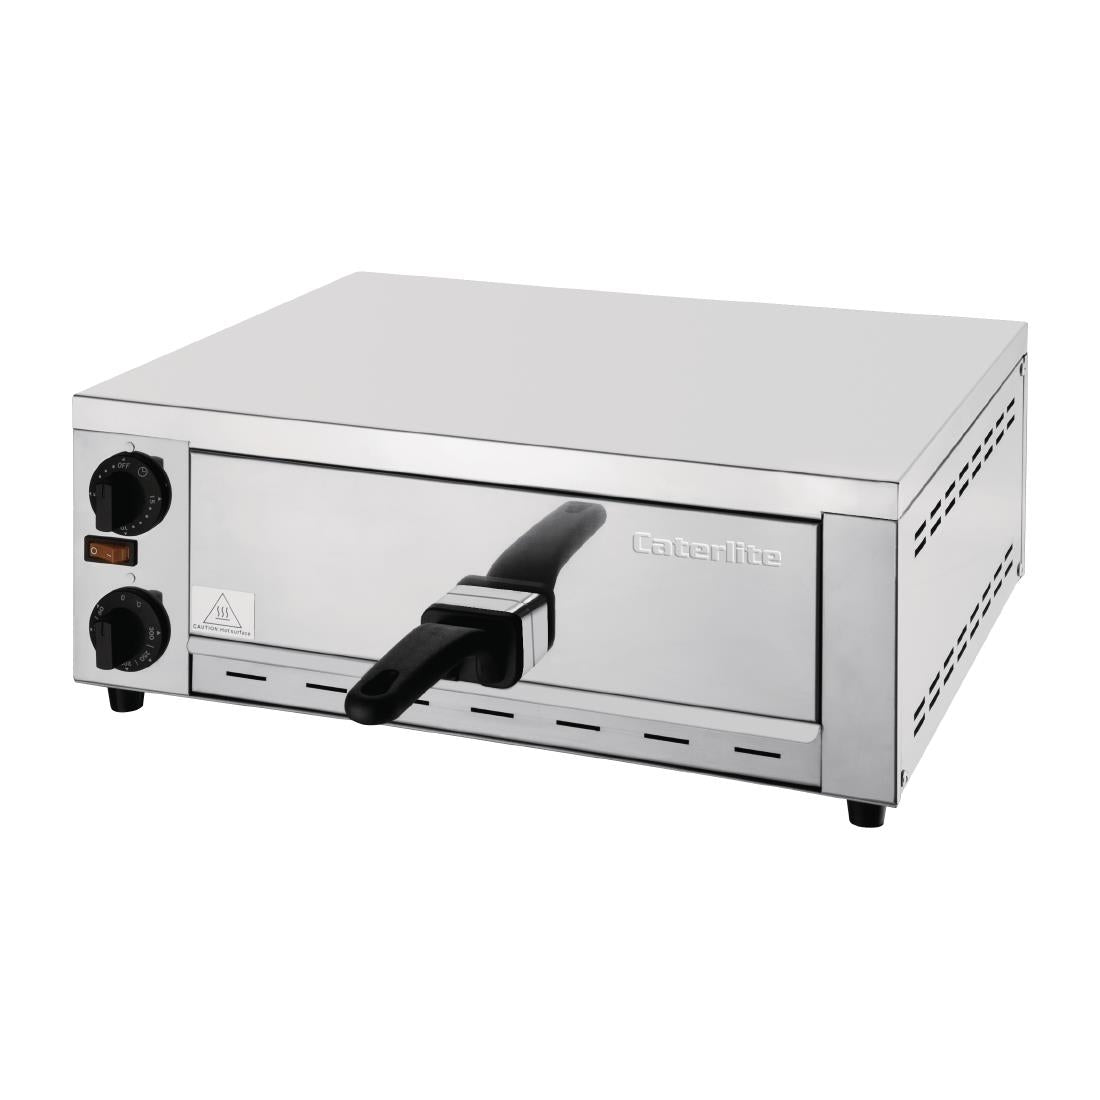 CR912 Caterlite Pizza Oven JD Catering Equipment Solutions Ltd